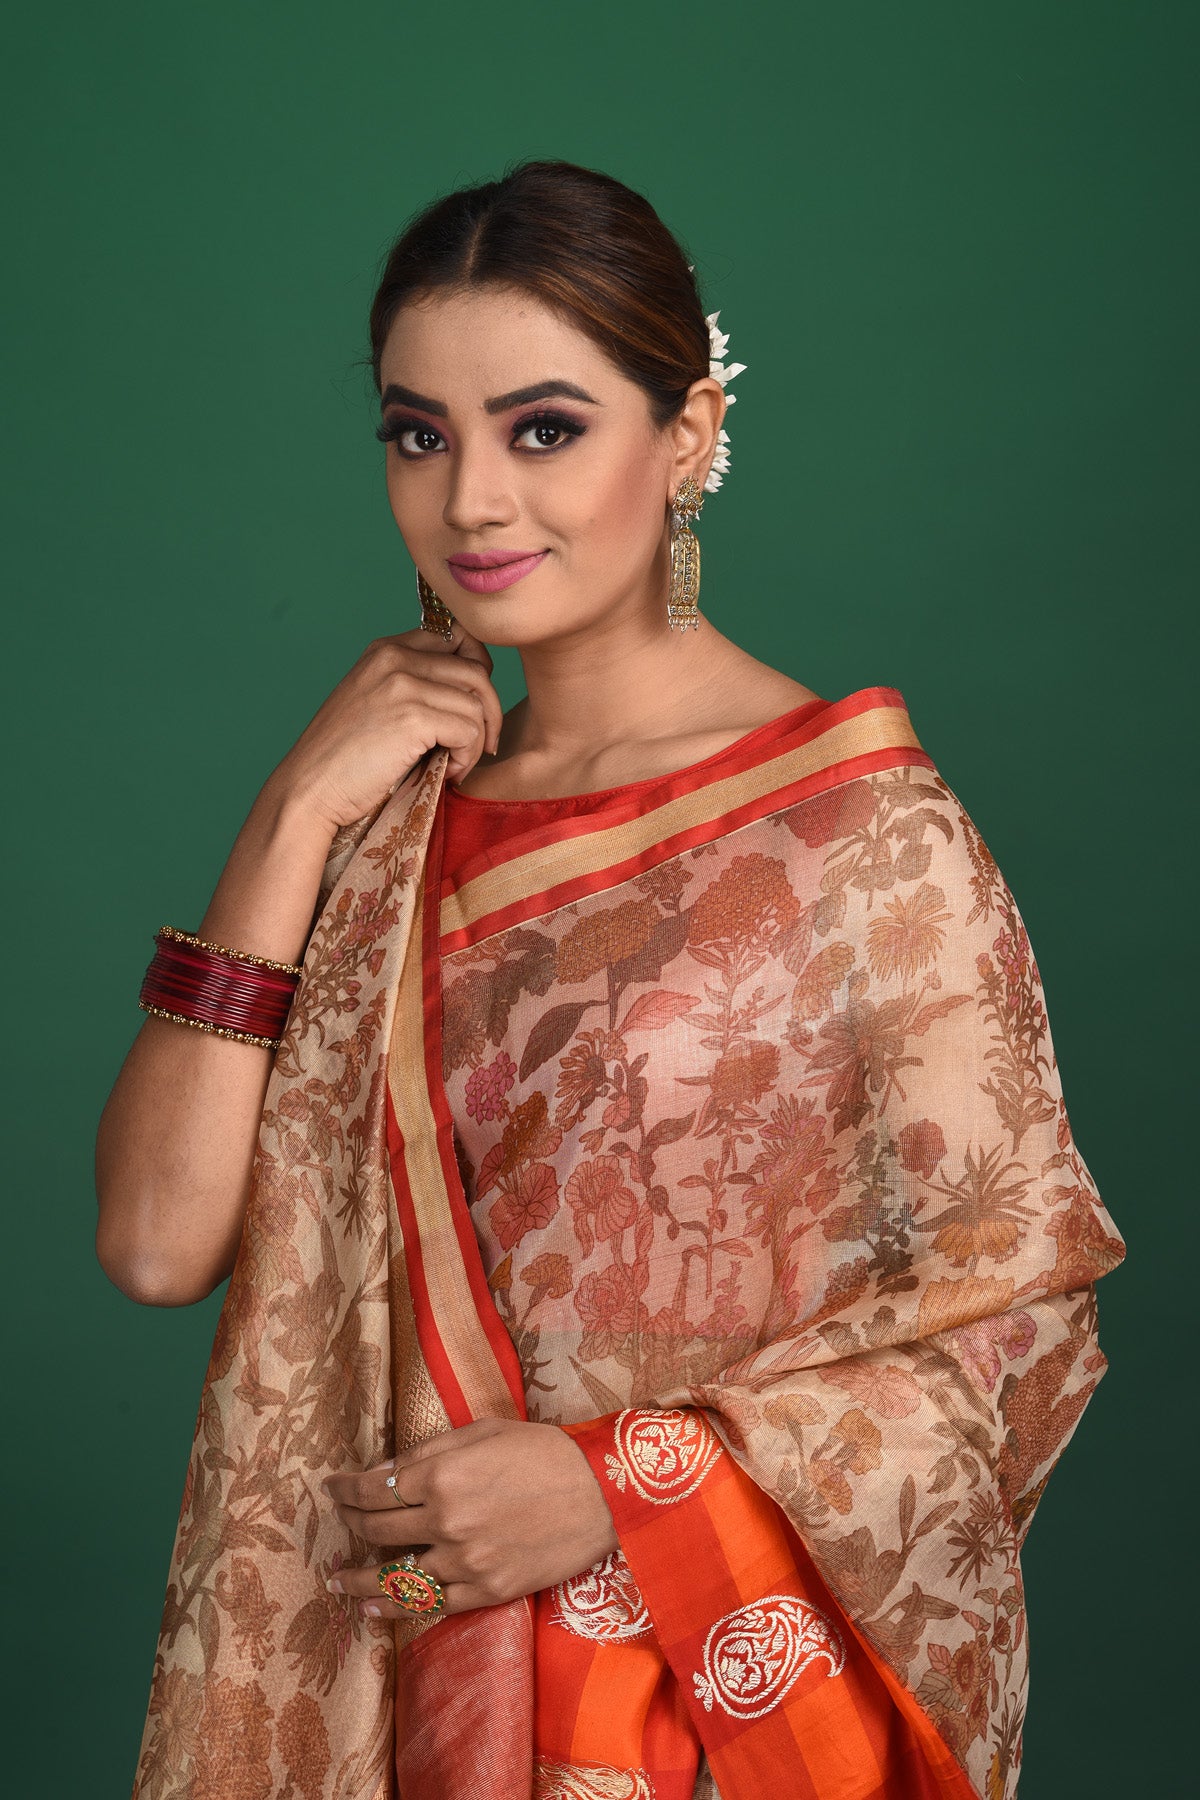 Buy beautiful beige printed Kanjeevaram saree online in USA with red and orange border. Be a vision of style and elegance at parties and special occasions in beautiful designer sarees, embroidered sarees, printed sarees, satin saris from Pure Elegance Indian fashion store in USA.-closeup